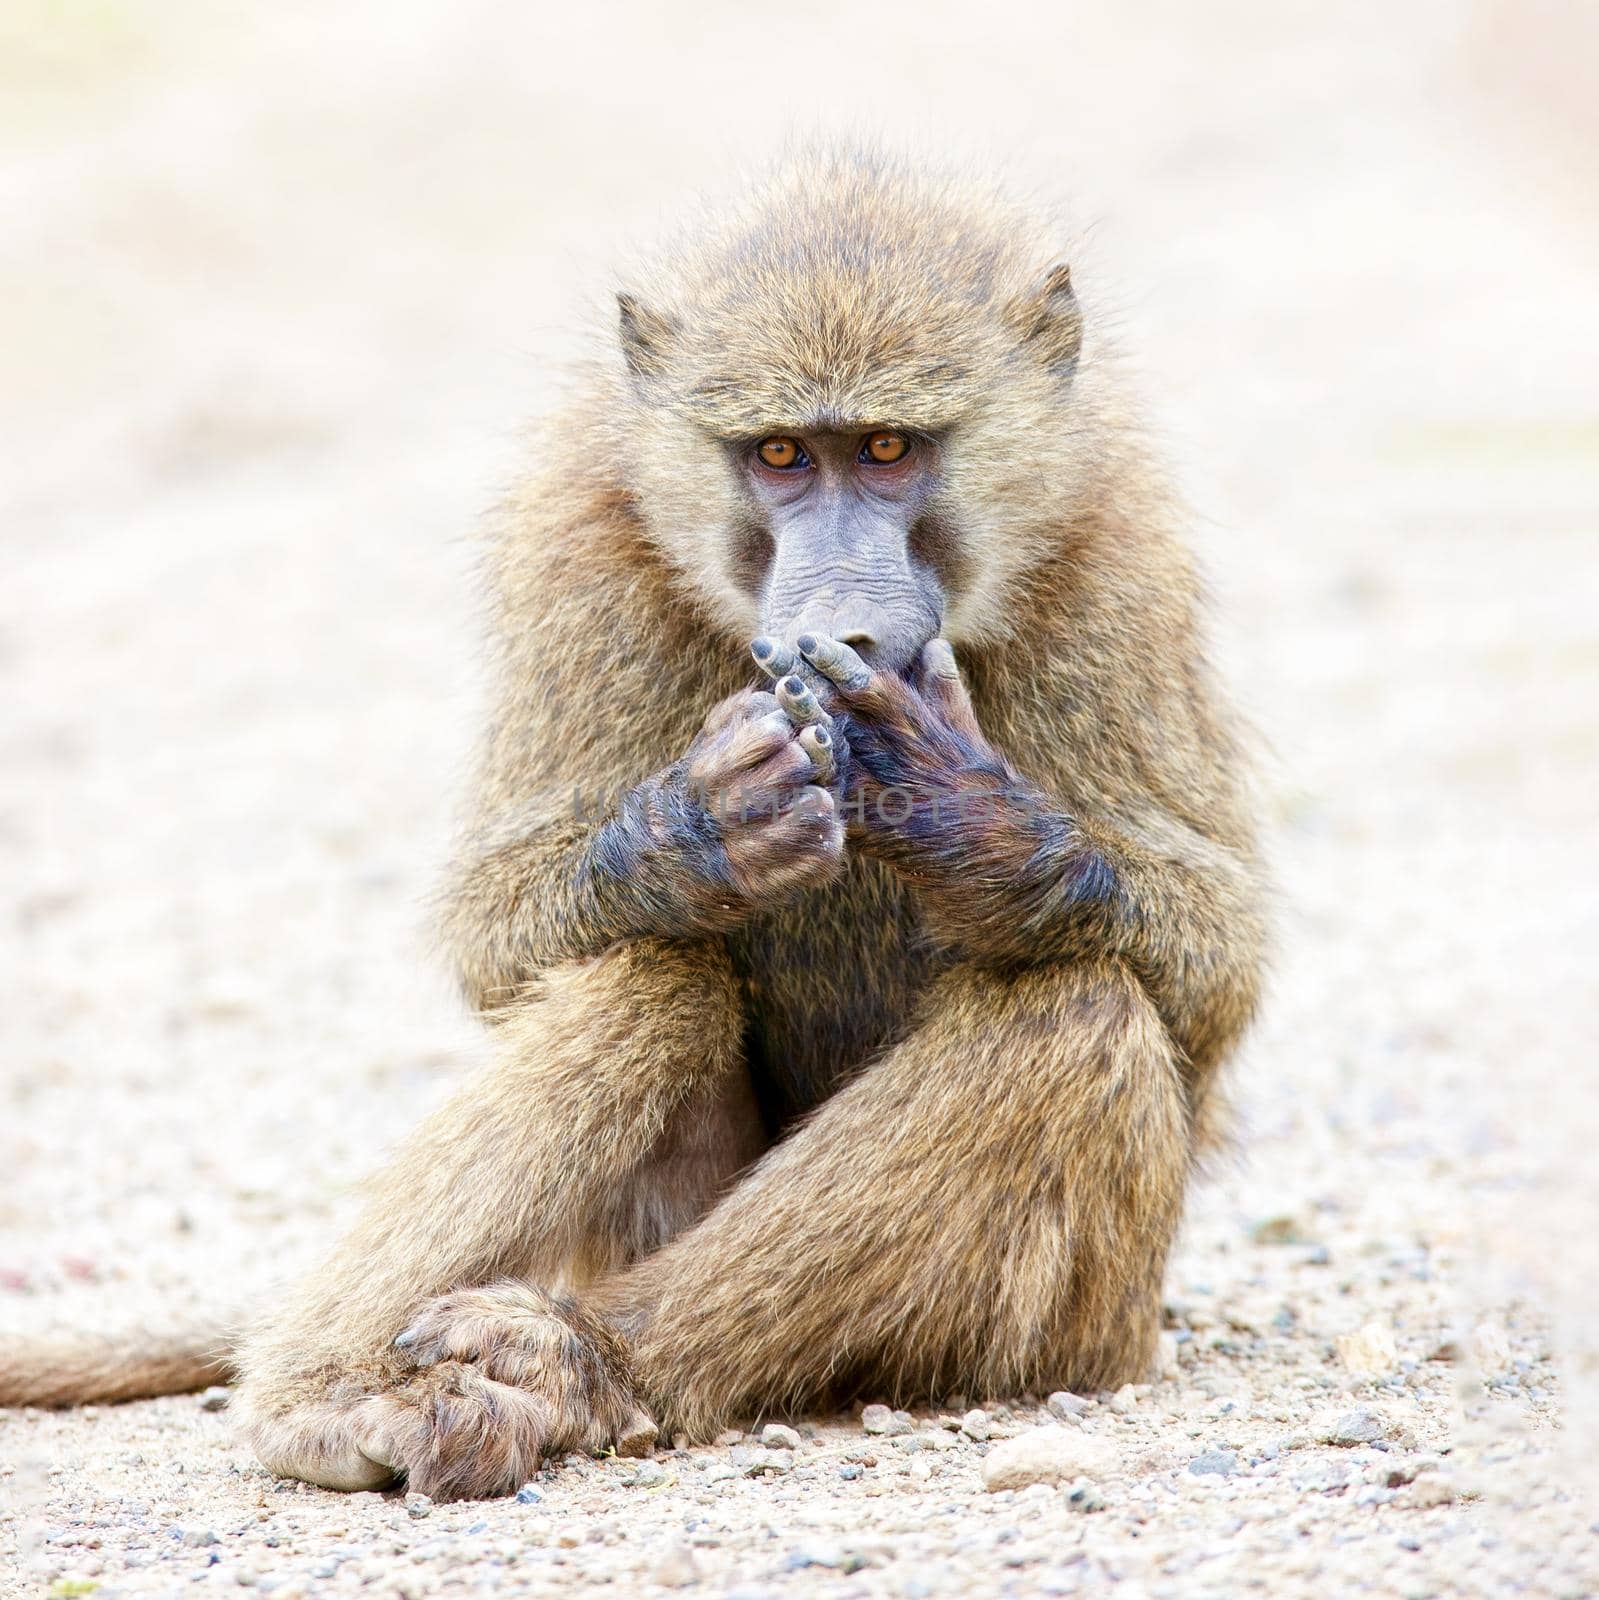 A baboon monkey is sitting on the sand and looking at its paw, wildlife. Kenya, a national park.